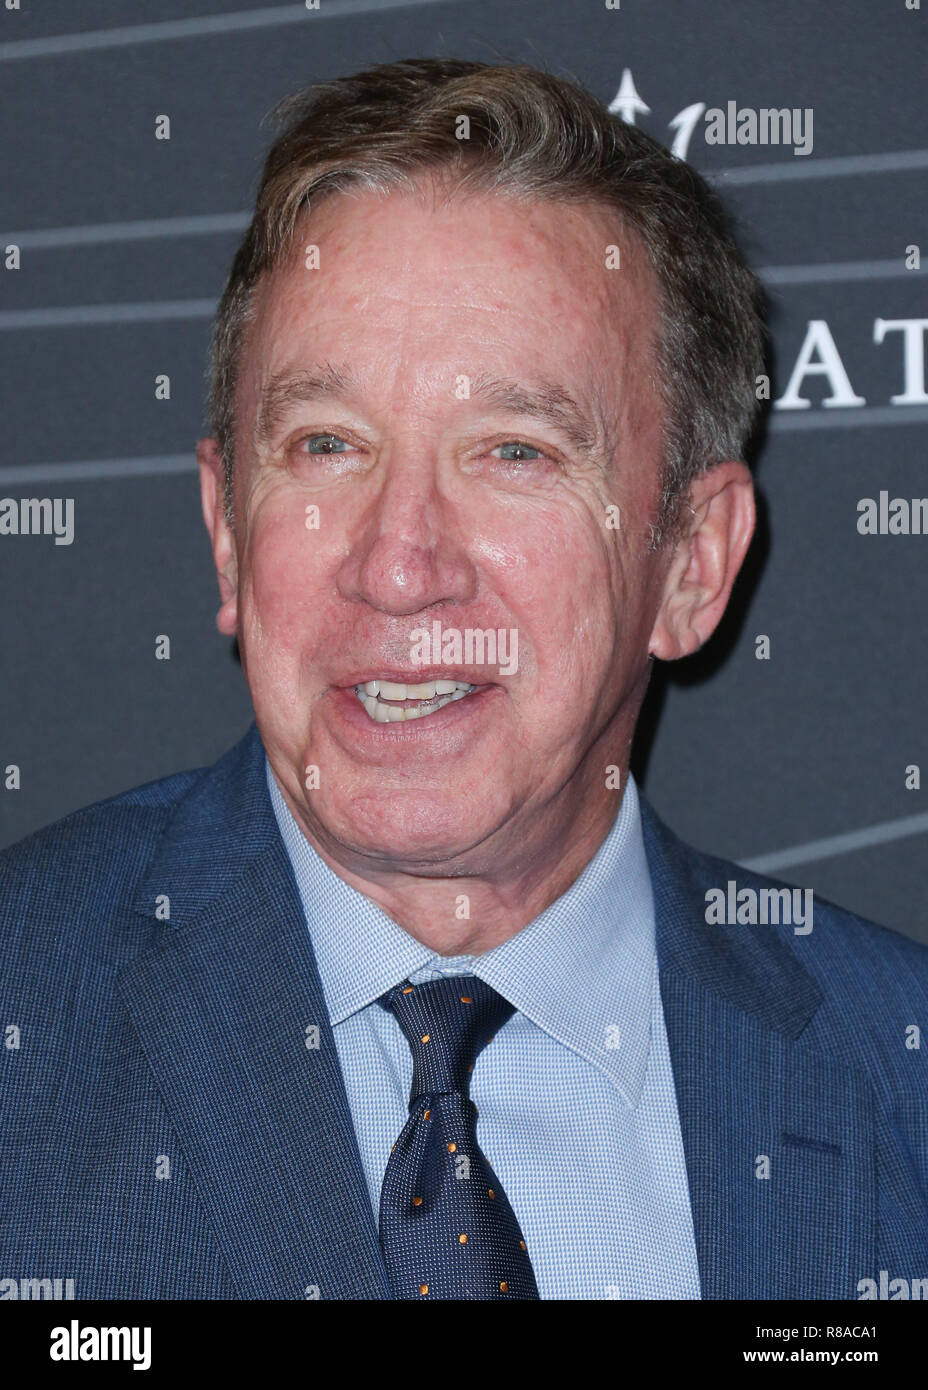 LOS ANGELES, CA, USA - OCTOBER 05: Tim Allen at the Petersen Automotive Museum Gala 2018 held at The Petersen Automotive Museum on October 5, 2018 in Los Angeles, California, United States. (Photo by David Acosta/Image Press Agency) Stock Photo